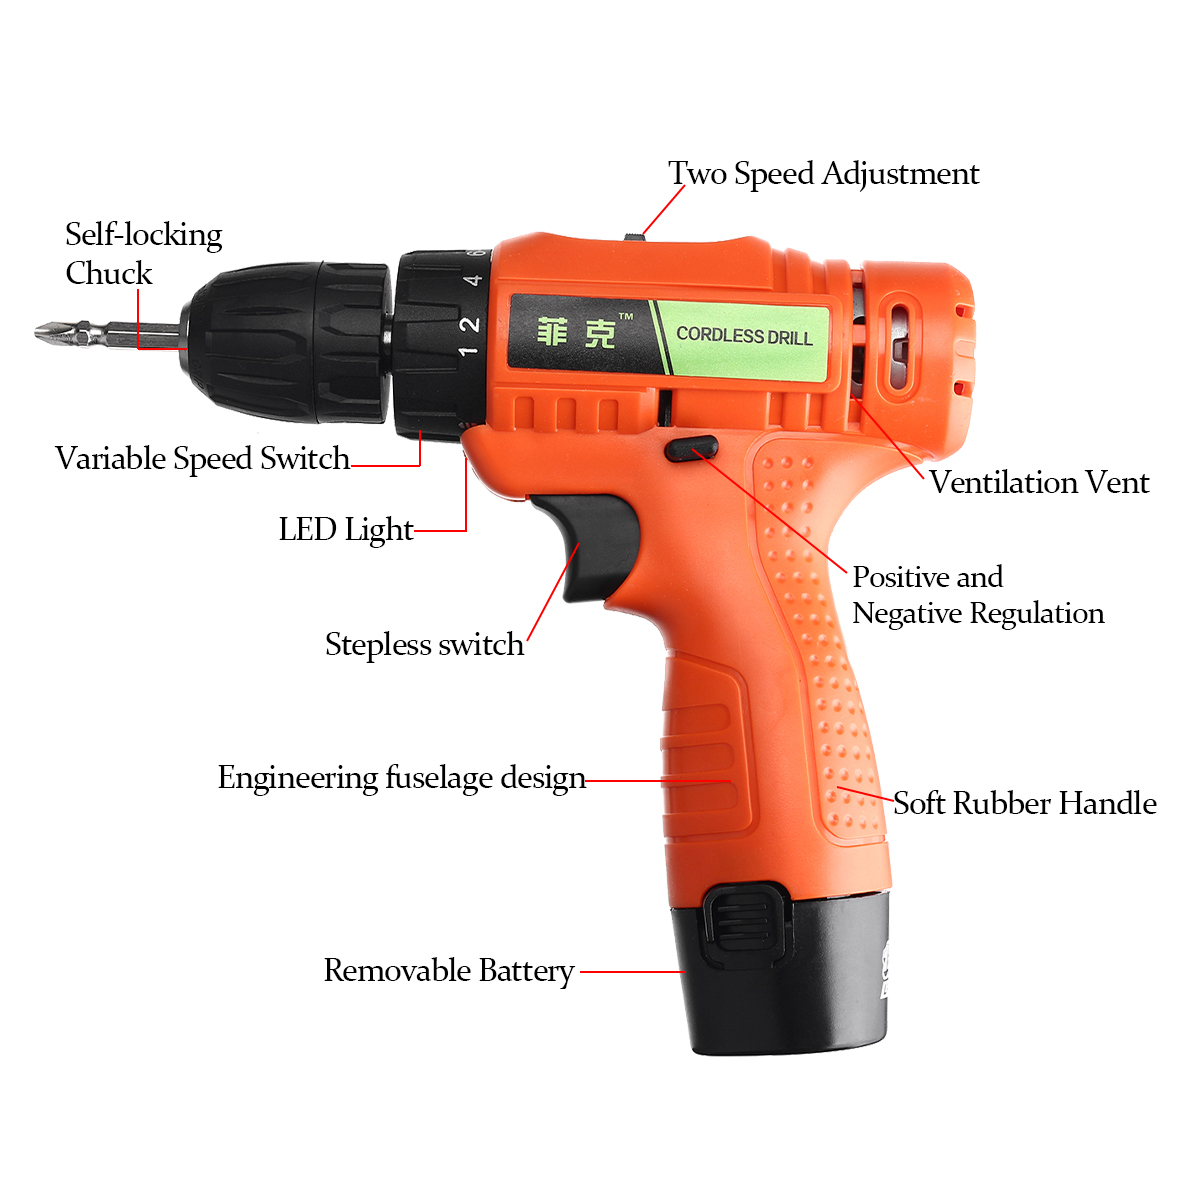 Dual-Speed-Rechargable-Electric-Scredriver-Drill-Mini-Power-Drill-Screw-Driver-Li-ion-Battery-Househ-1659814-7